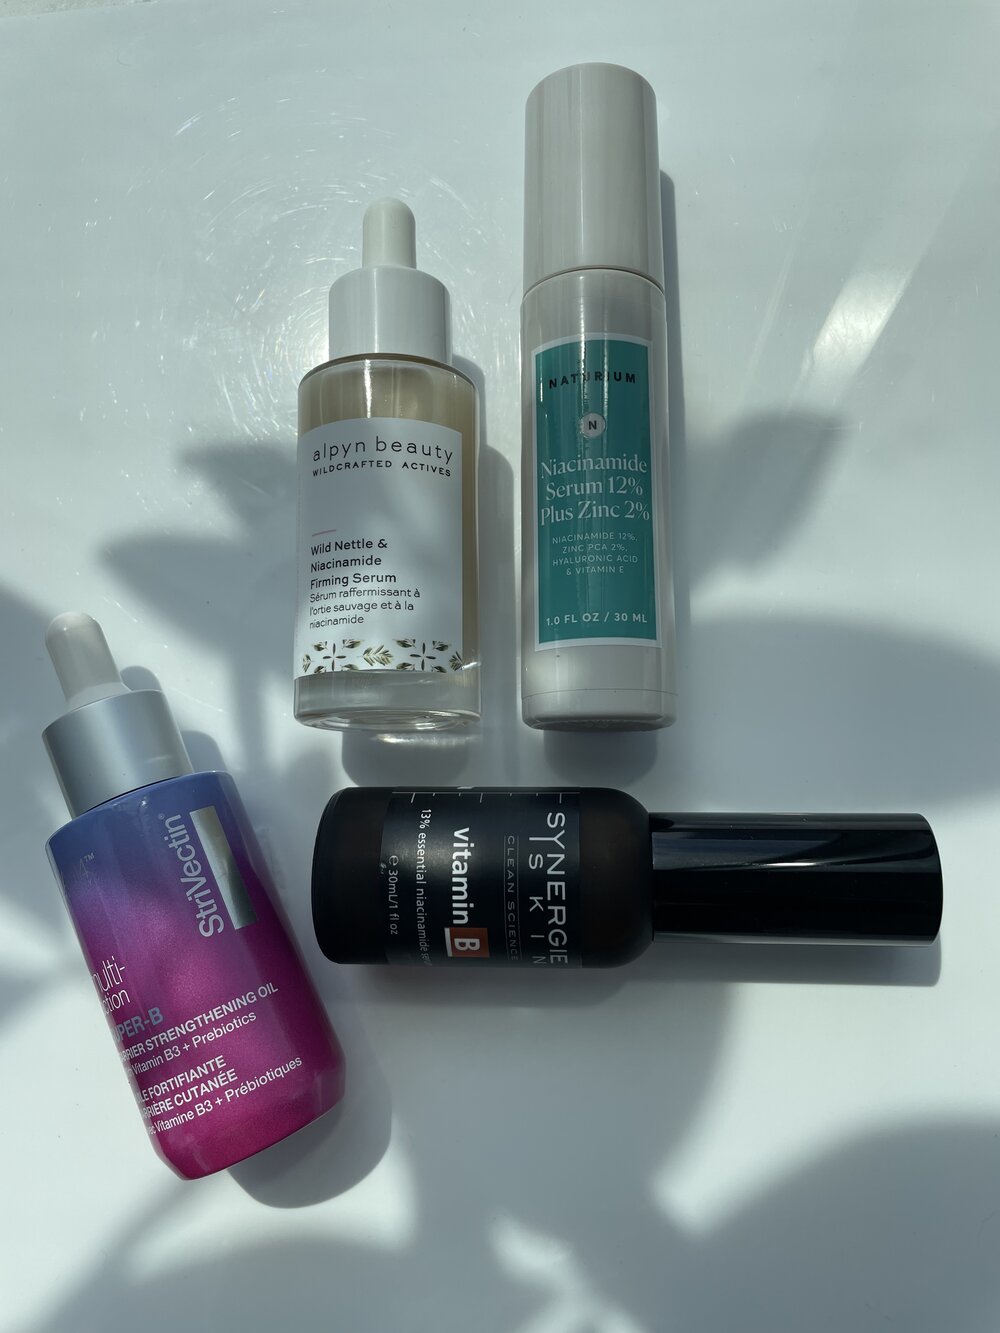 NIACINAMIDE ALPYN SERUMS FROM NATURIUM, BEAUTY SERUMS - AND STRIVECTIN BEST NIACINAMIDE